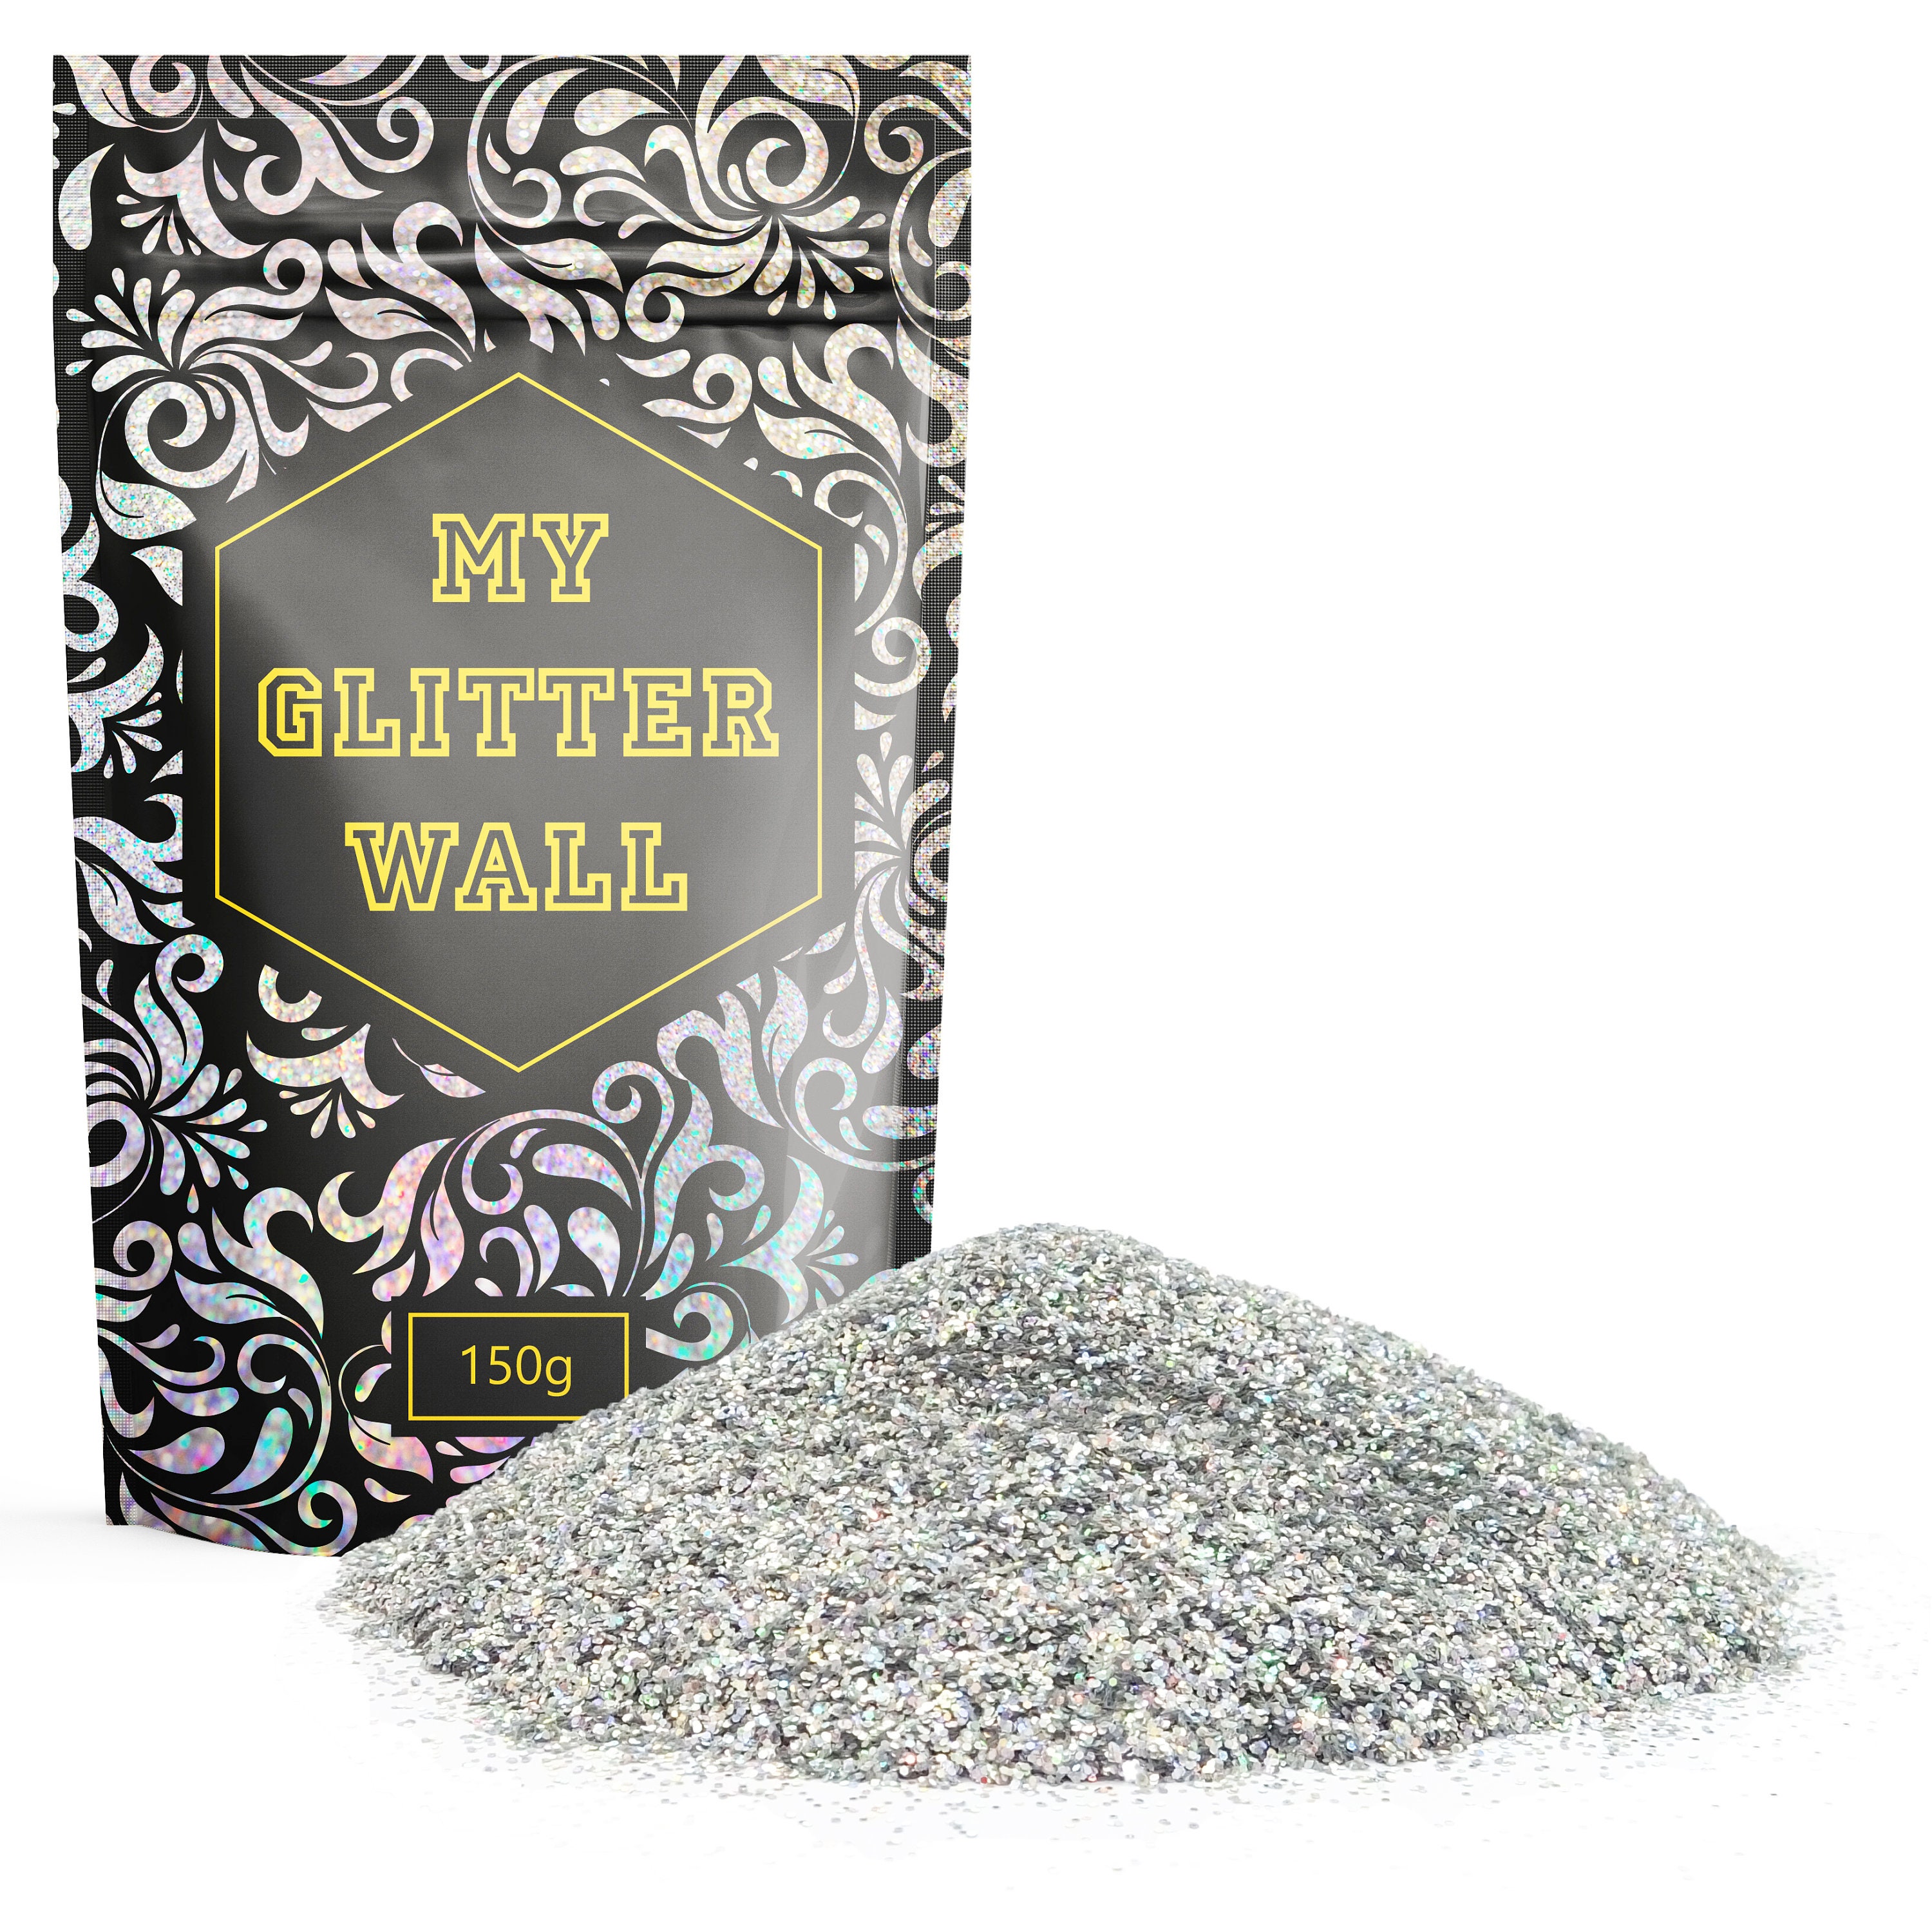 MyGlitterWall 300G Glitter for Emulsion Paint Glittery Wall Decorations  Perfect for Indoors and Outdoors (Gold)